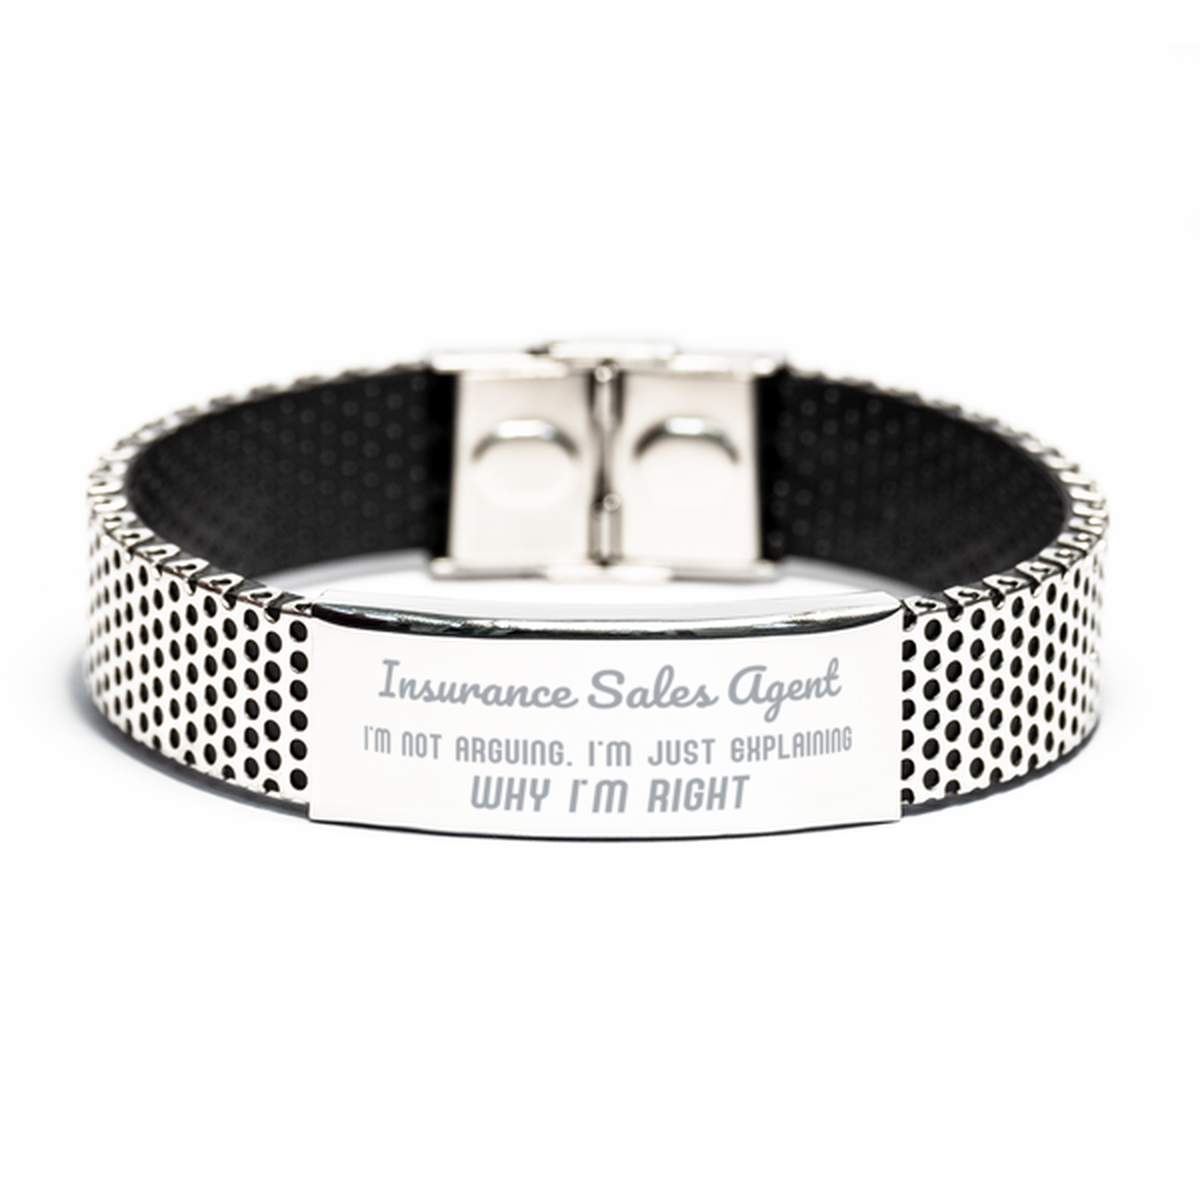 Insurance Sales Agent I'm not Arguing. I'm Just Explaining Why I'm RIGHT Stainless Steel Bracelet, Funny Saying Quote Insurance Sales Agent Gifts For Insurance Sales Agent Graduation Birthday Christmas Gifts for Men Women Coworker